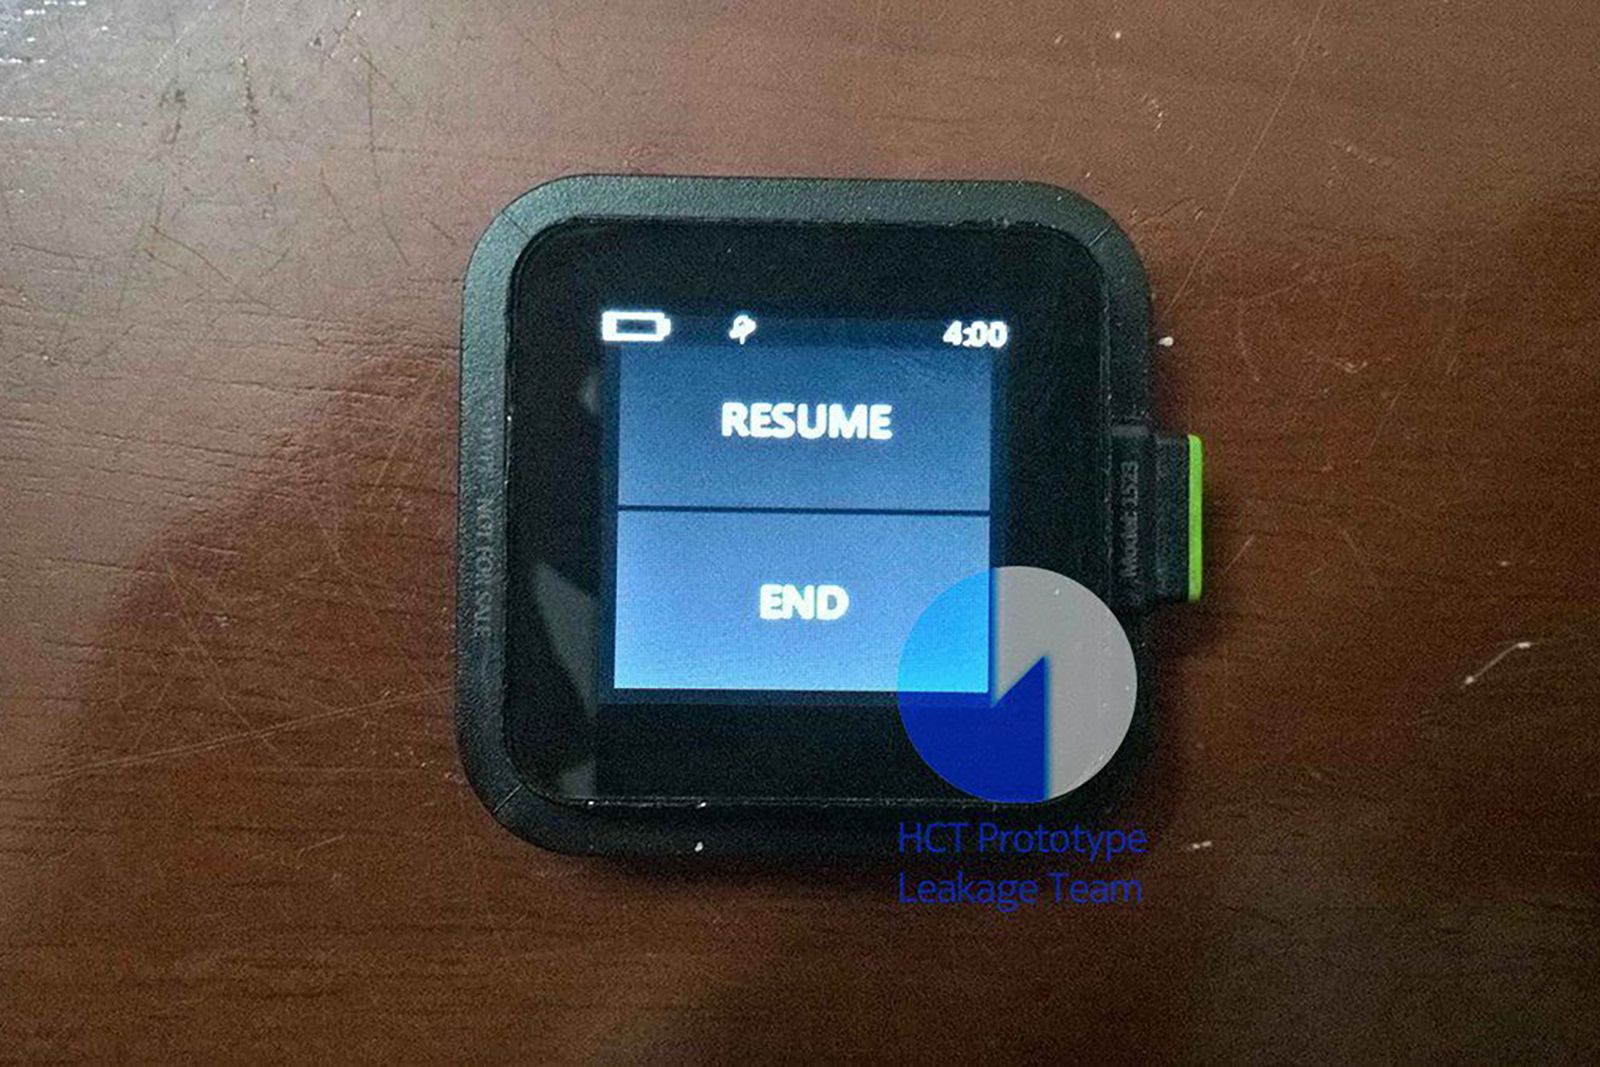 Microsoft Xbox Watch leaks out New pics reveal scrapped watch image 1